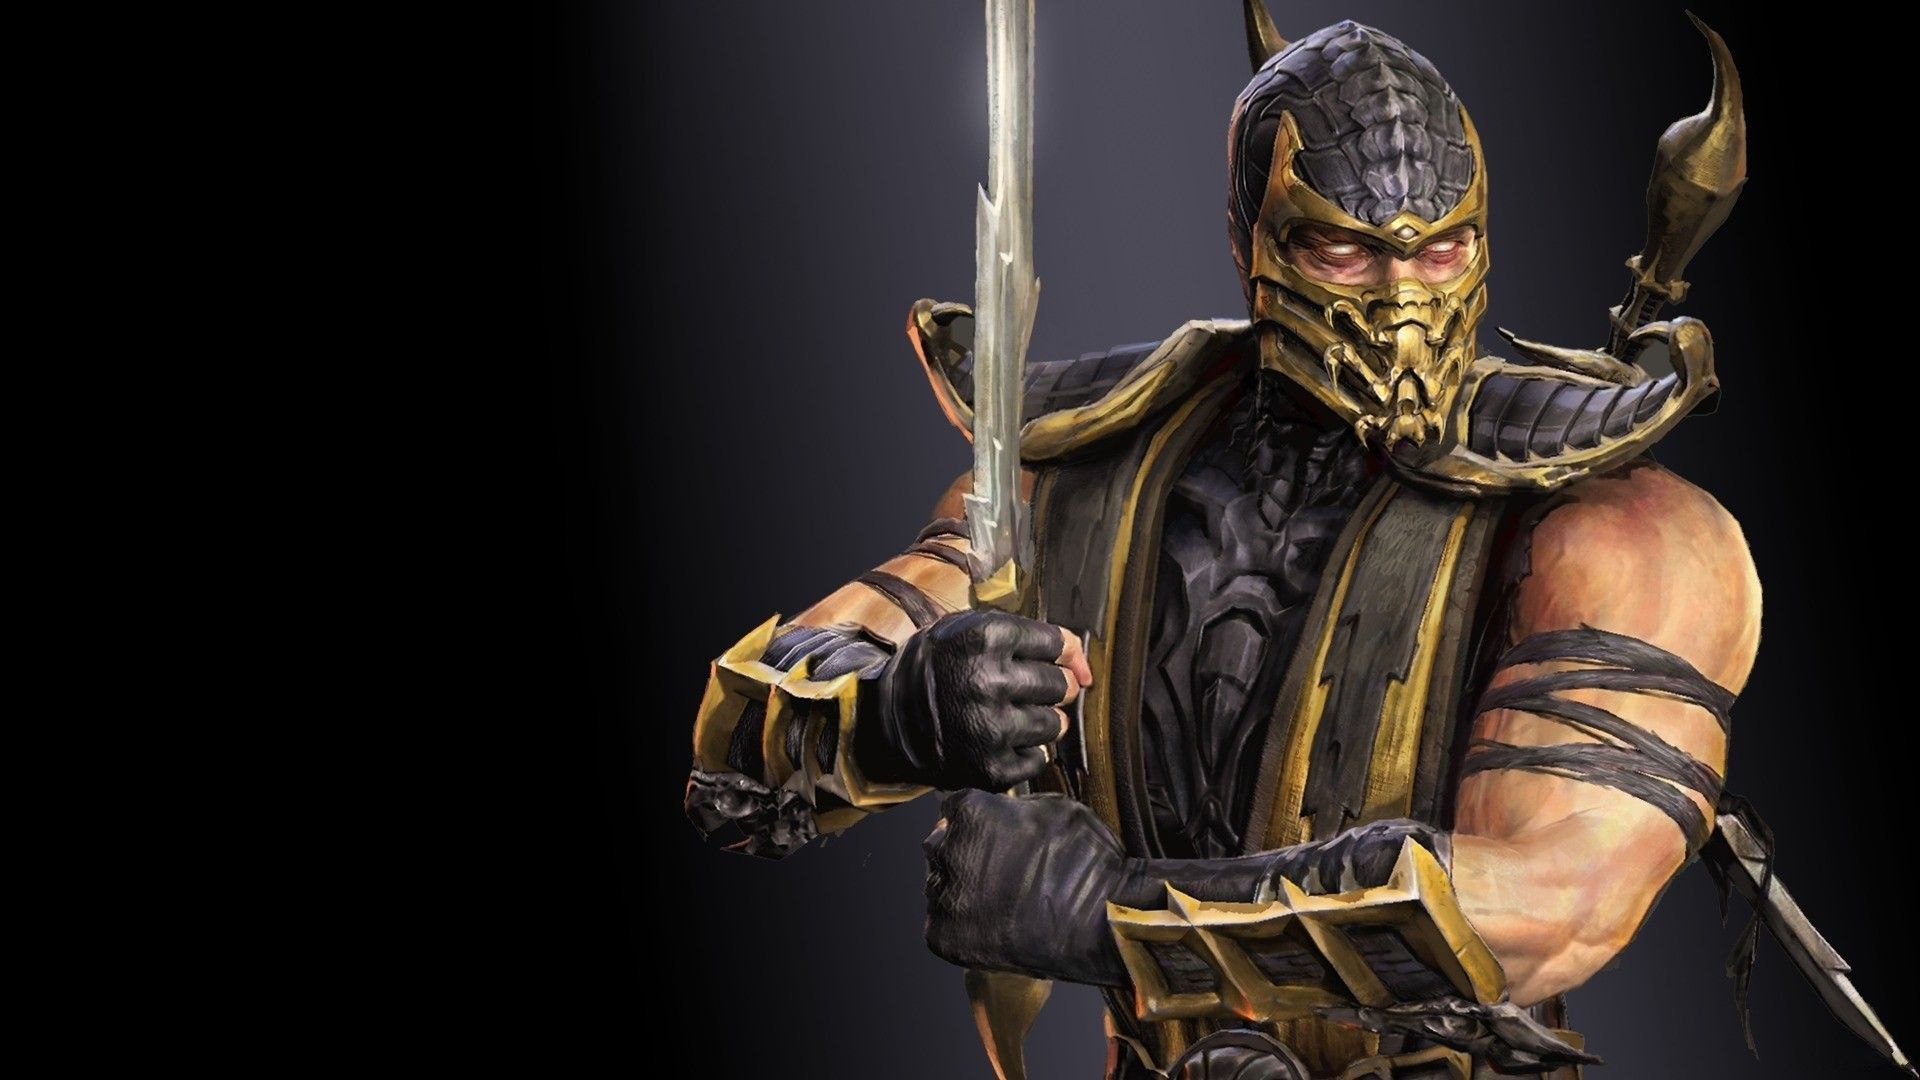 Scorpion Mortal Kombat Wallpaper and Pictures Cool Backgrounds